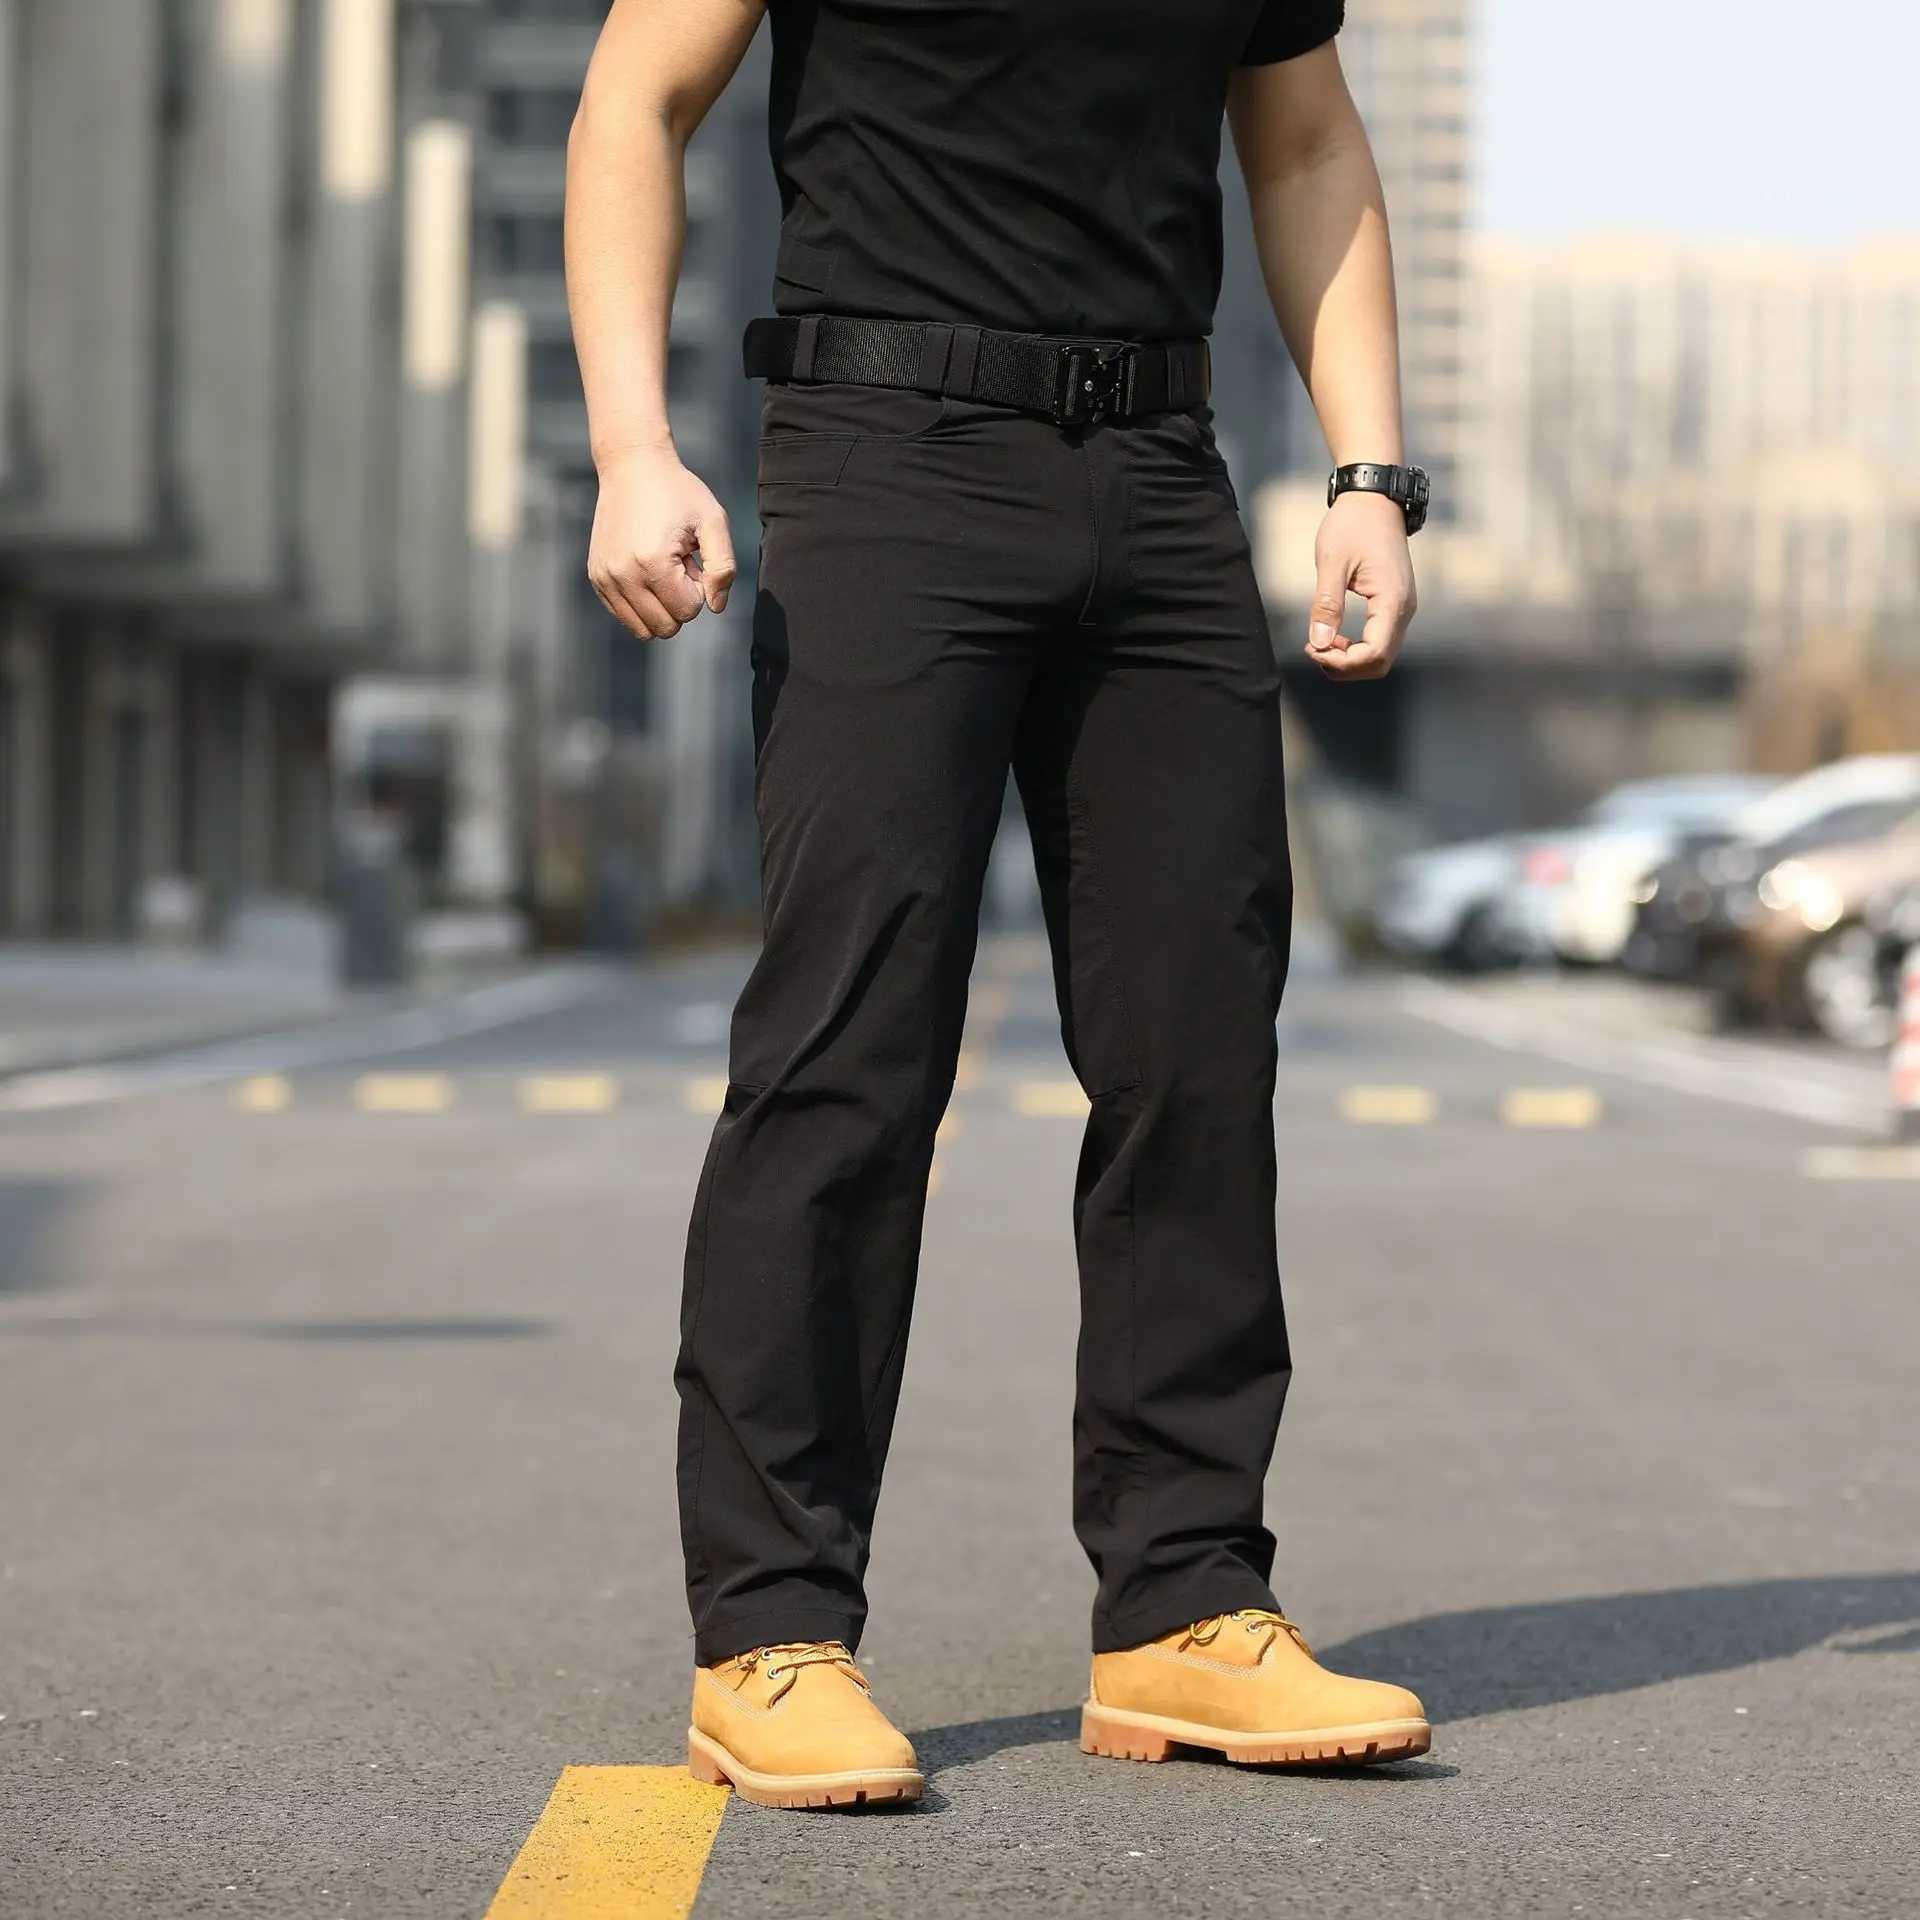 MODOQO Mens Cargo Pants Straight-Fit Causal Tactical Pants Outdoor Work Hiking Military Trousers 